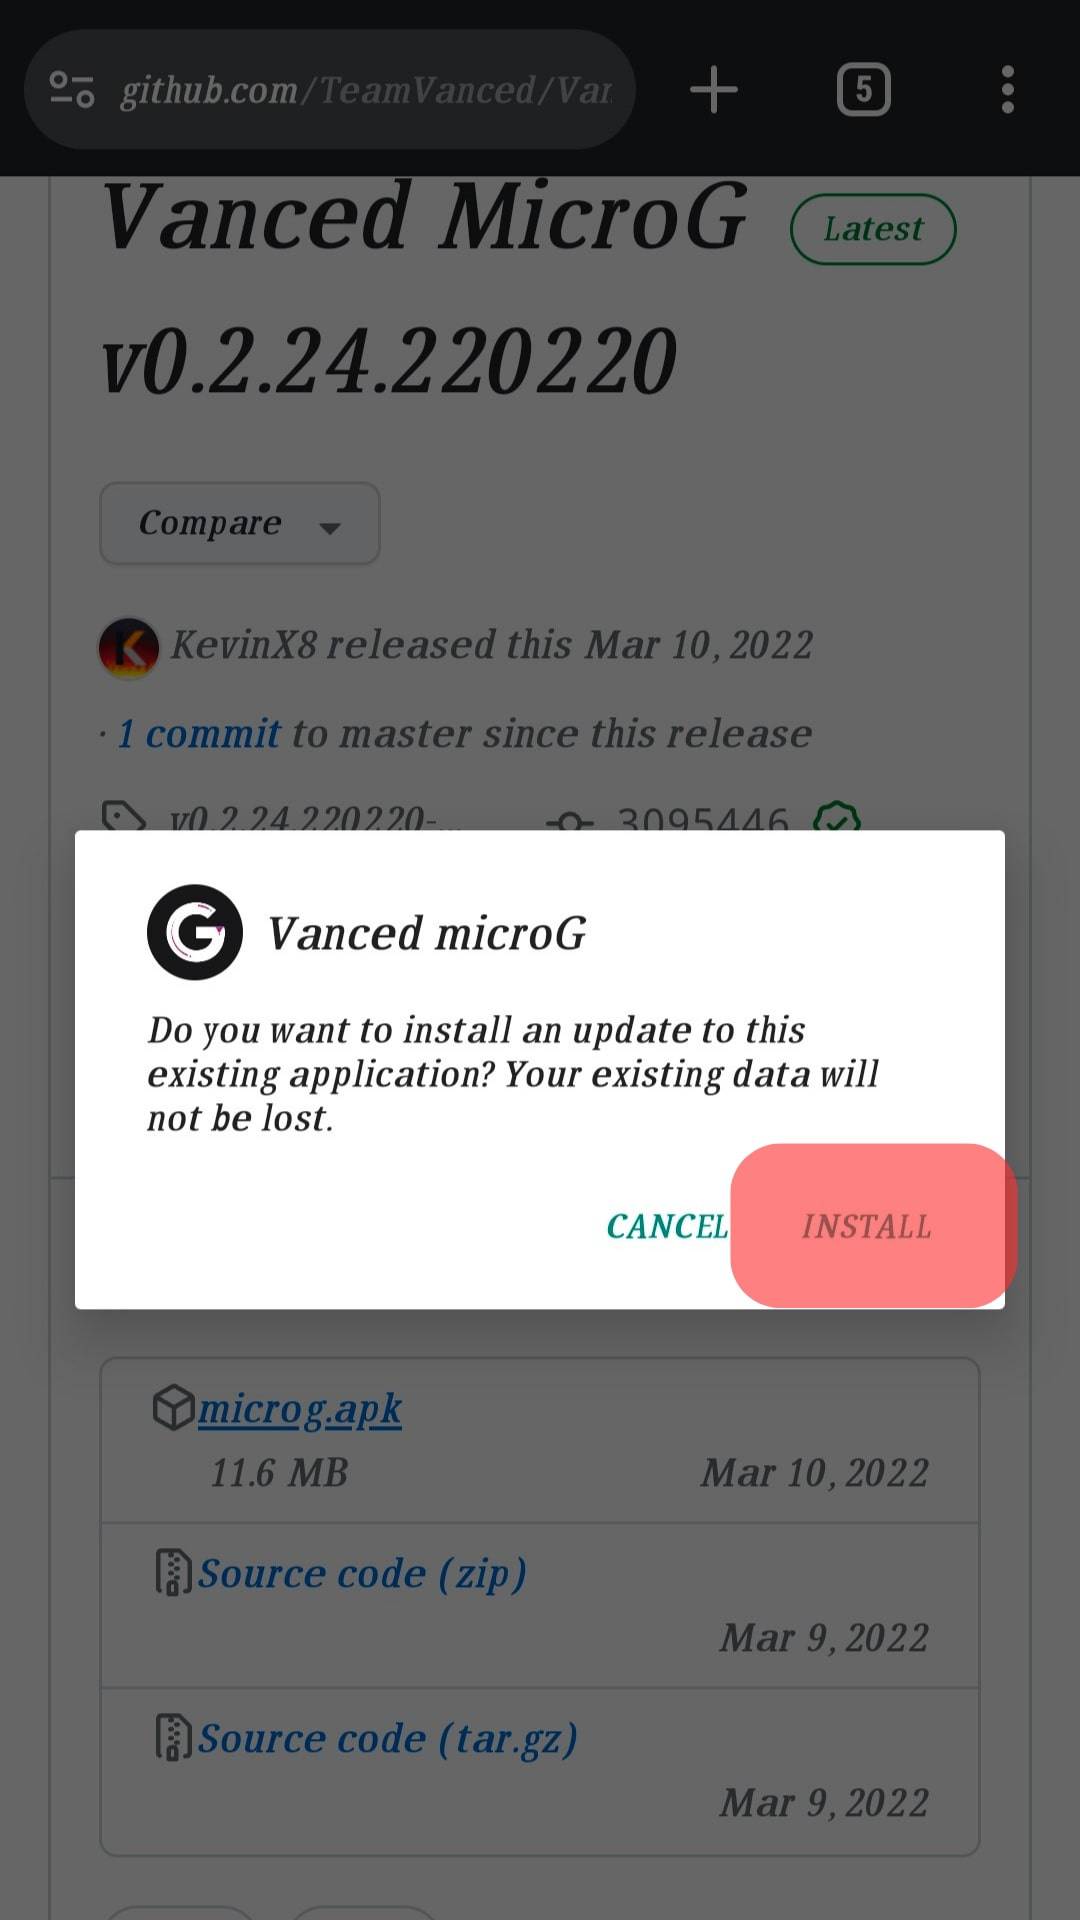 Download And Install The Vanced Microg Apk File.